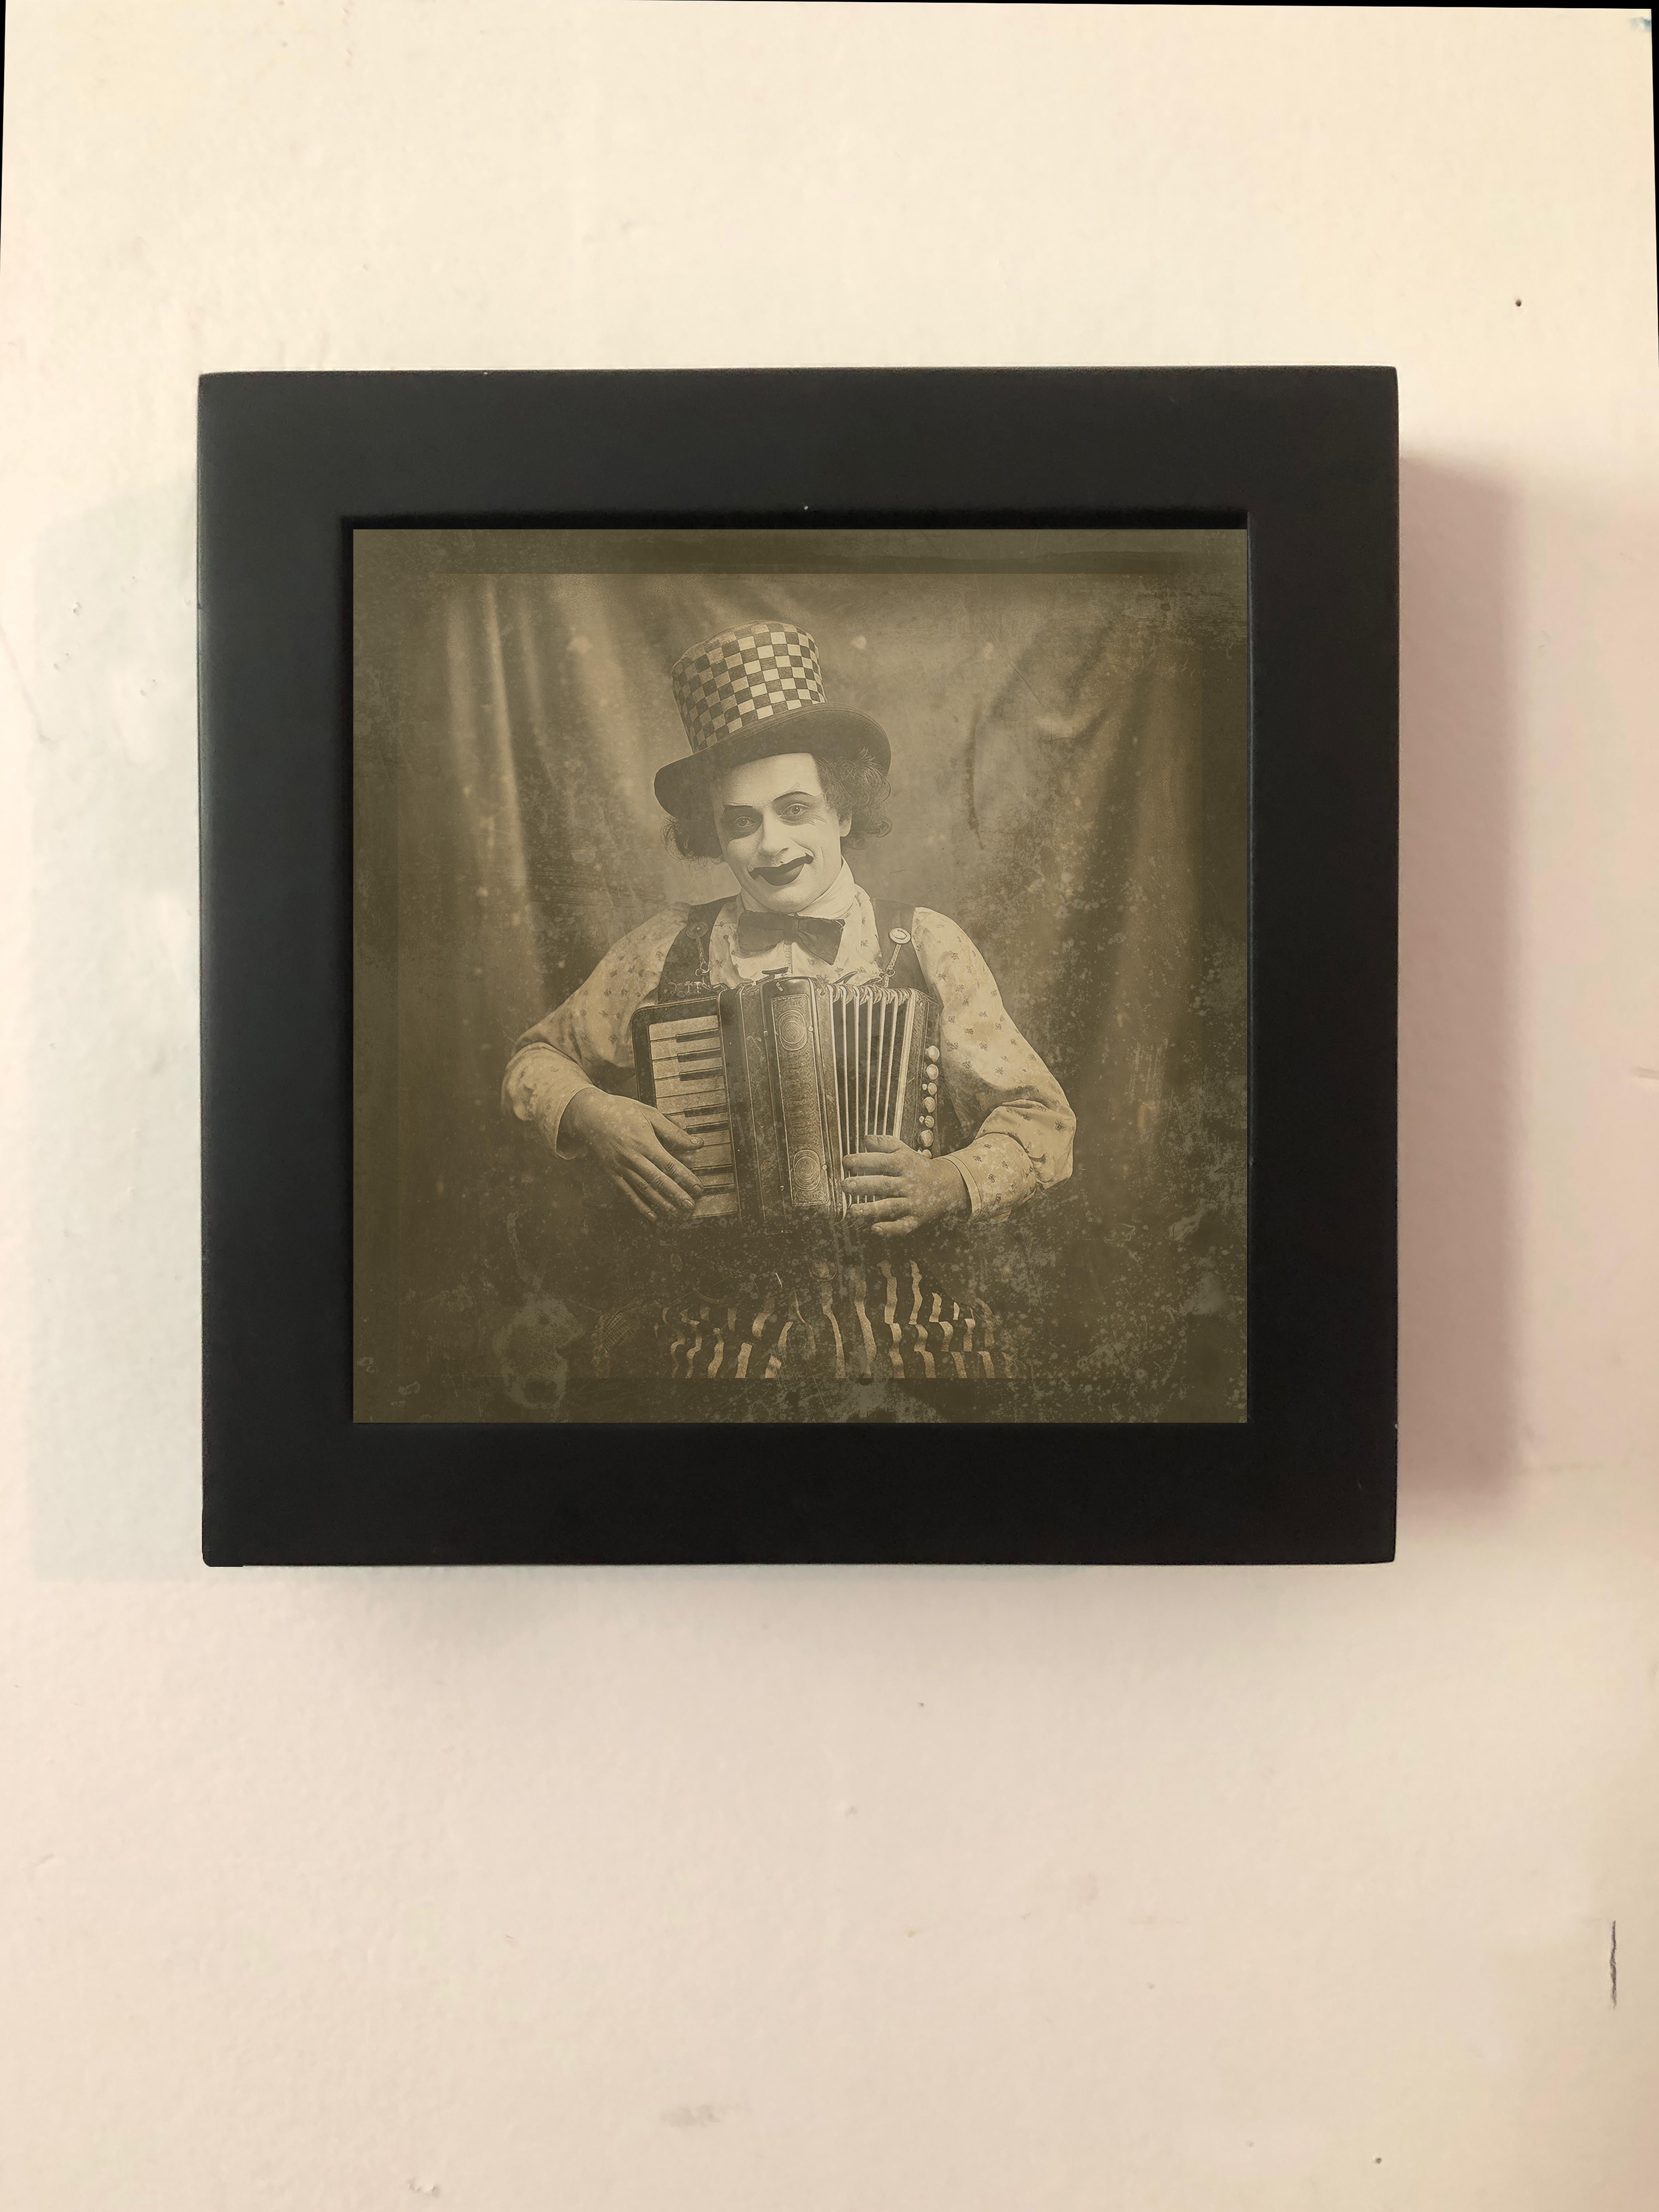 Clown accordionist  - Black Figurative Photograph by FPA Francis Pavy Artist